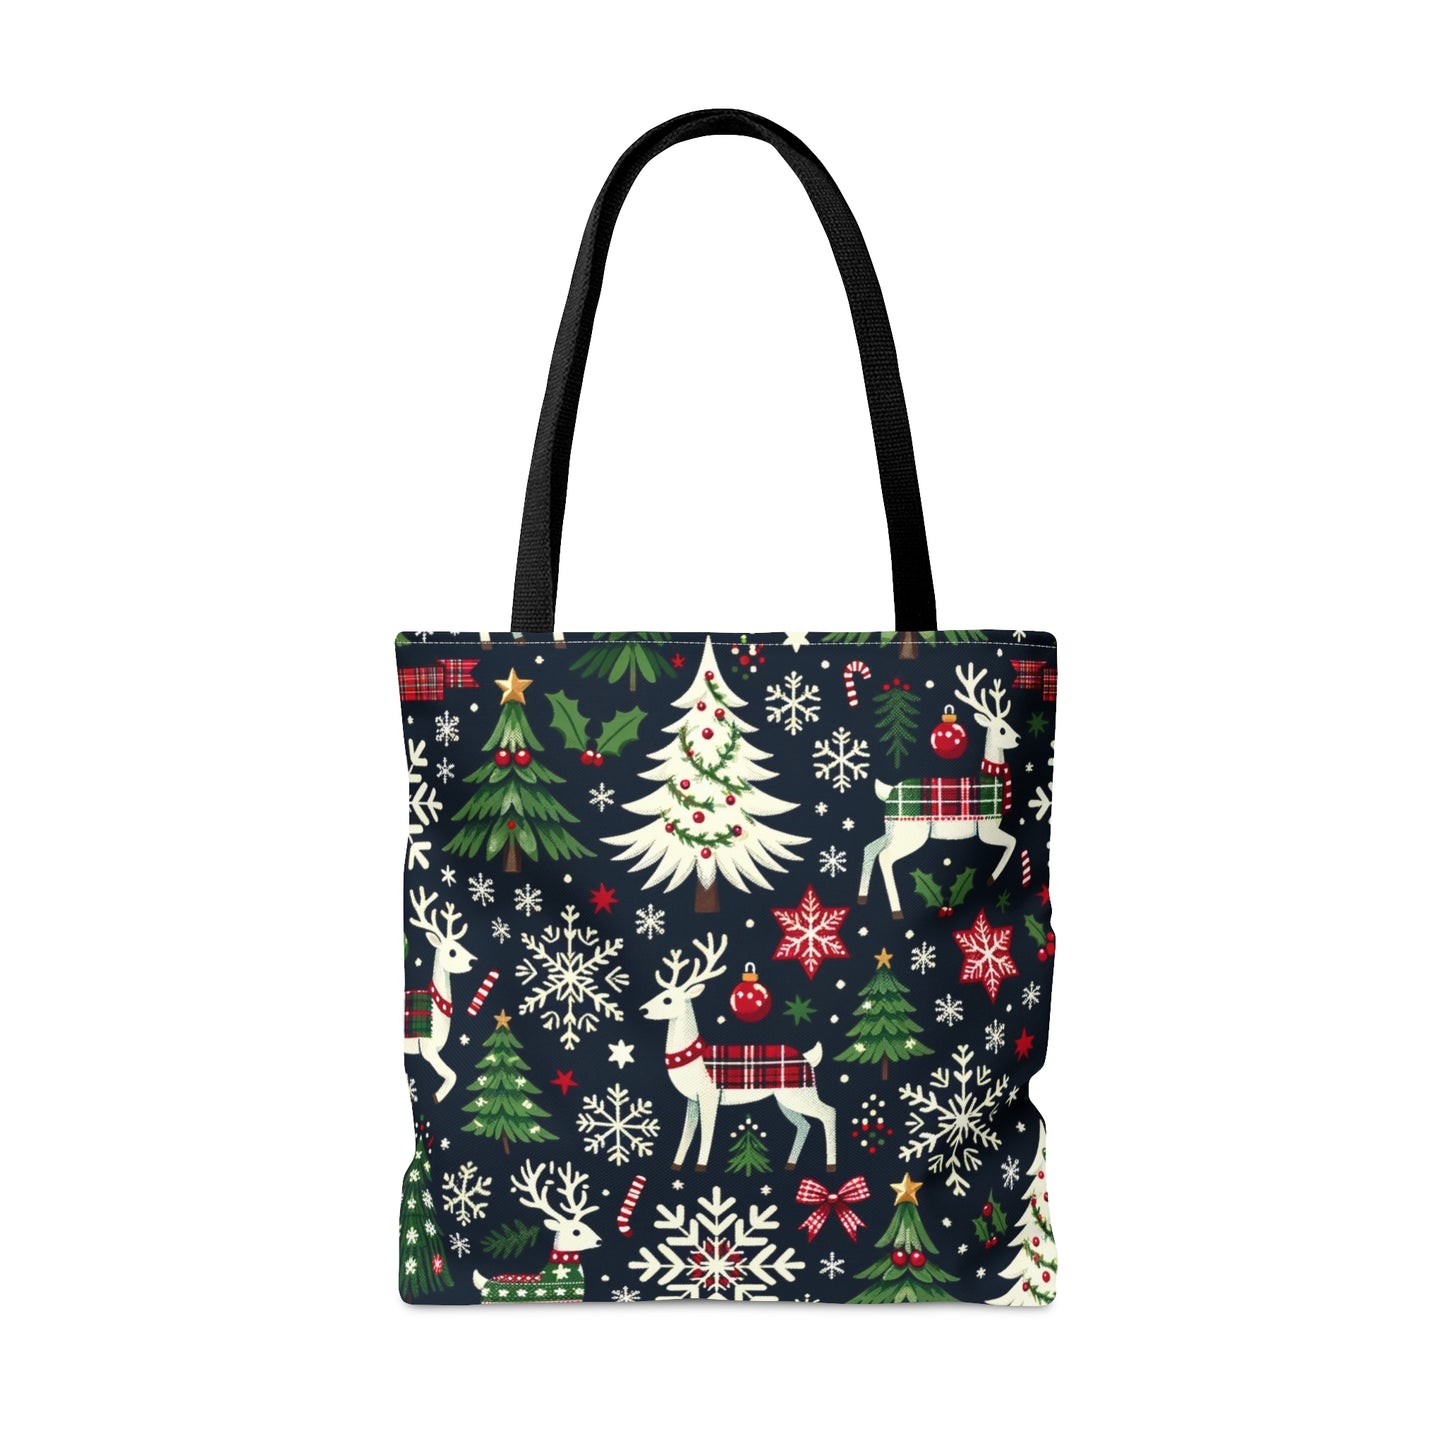 Christmas Tote Bag, Xmas Holiday Festive Reindeer Winter Cute Canvas Shopping Small Large Travel Reusable Aesthetic Shoulder Bag